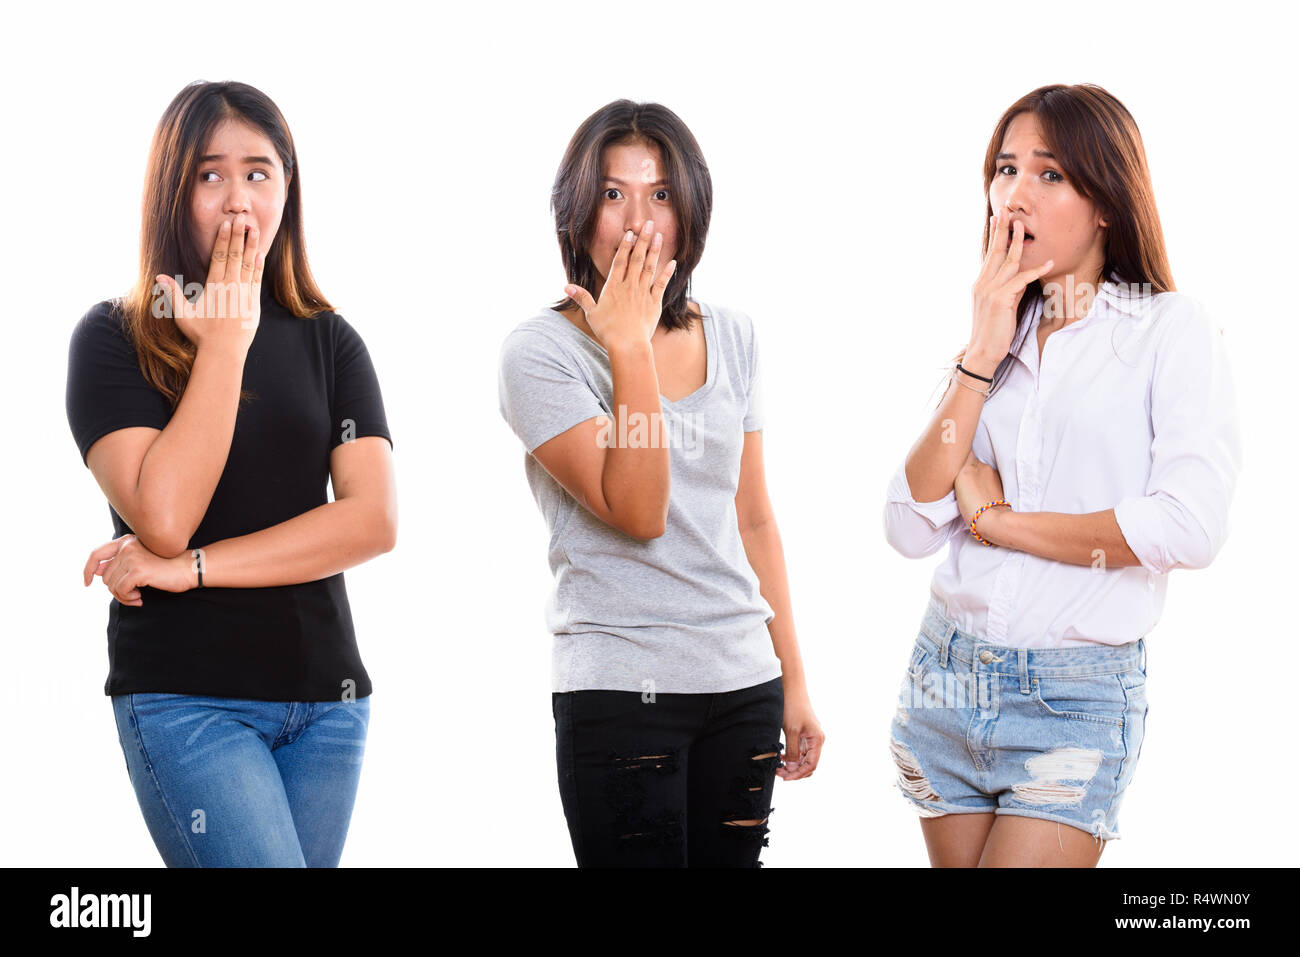 Studio shot of three young Asian woman friends looking shocked Stock Photo